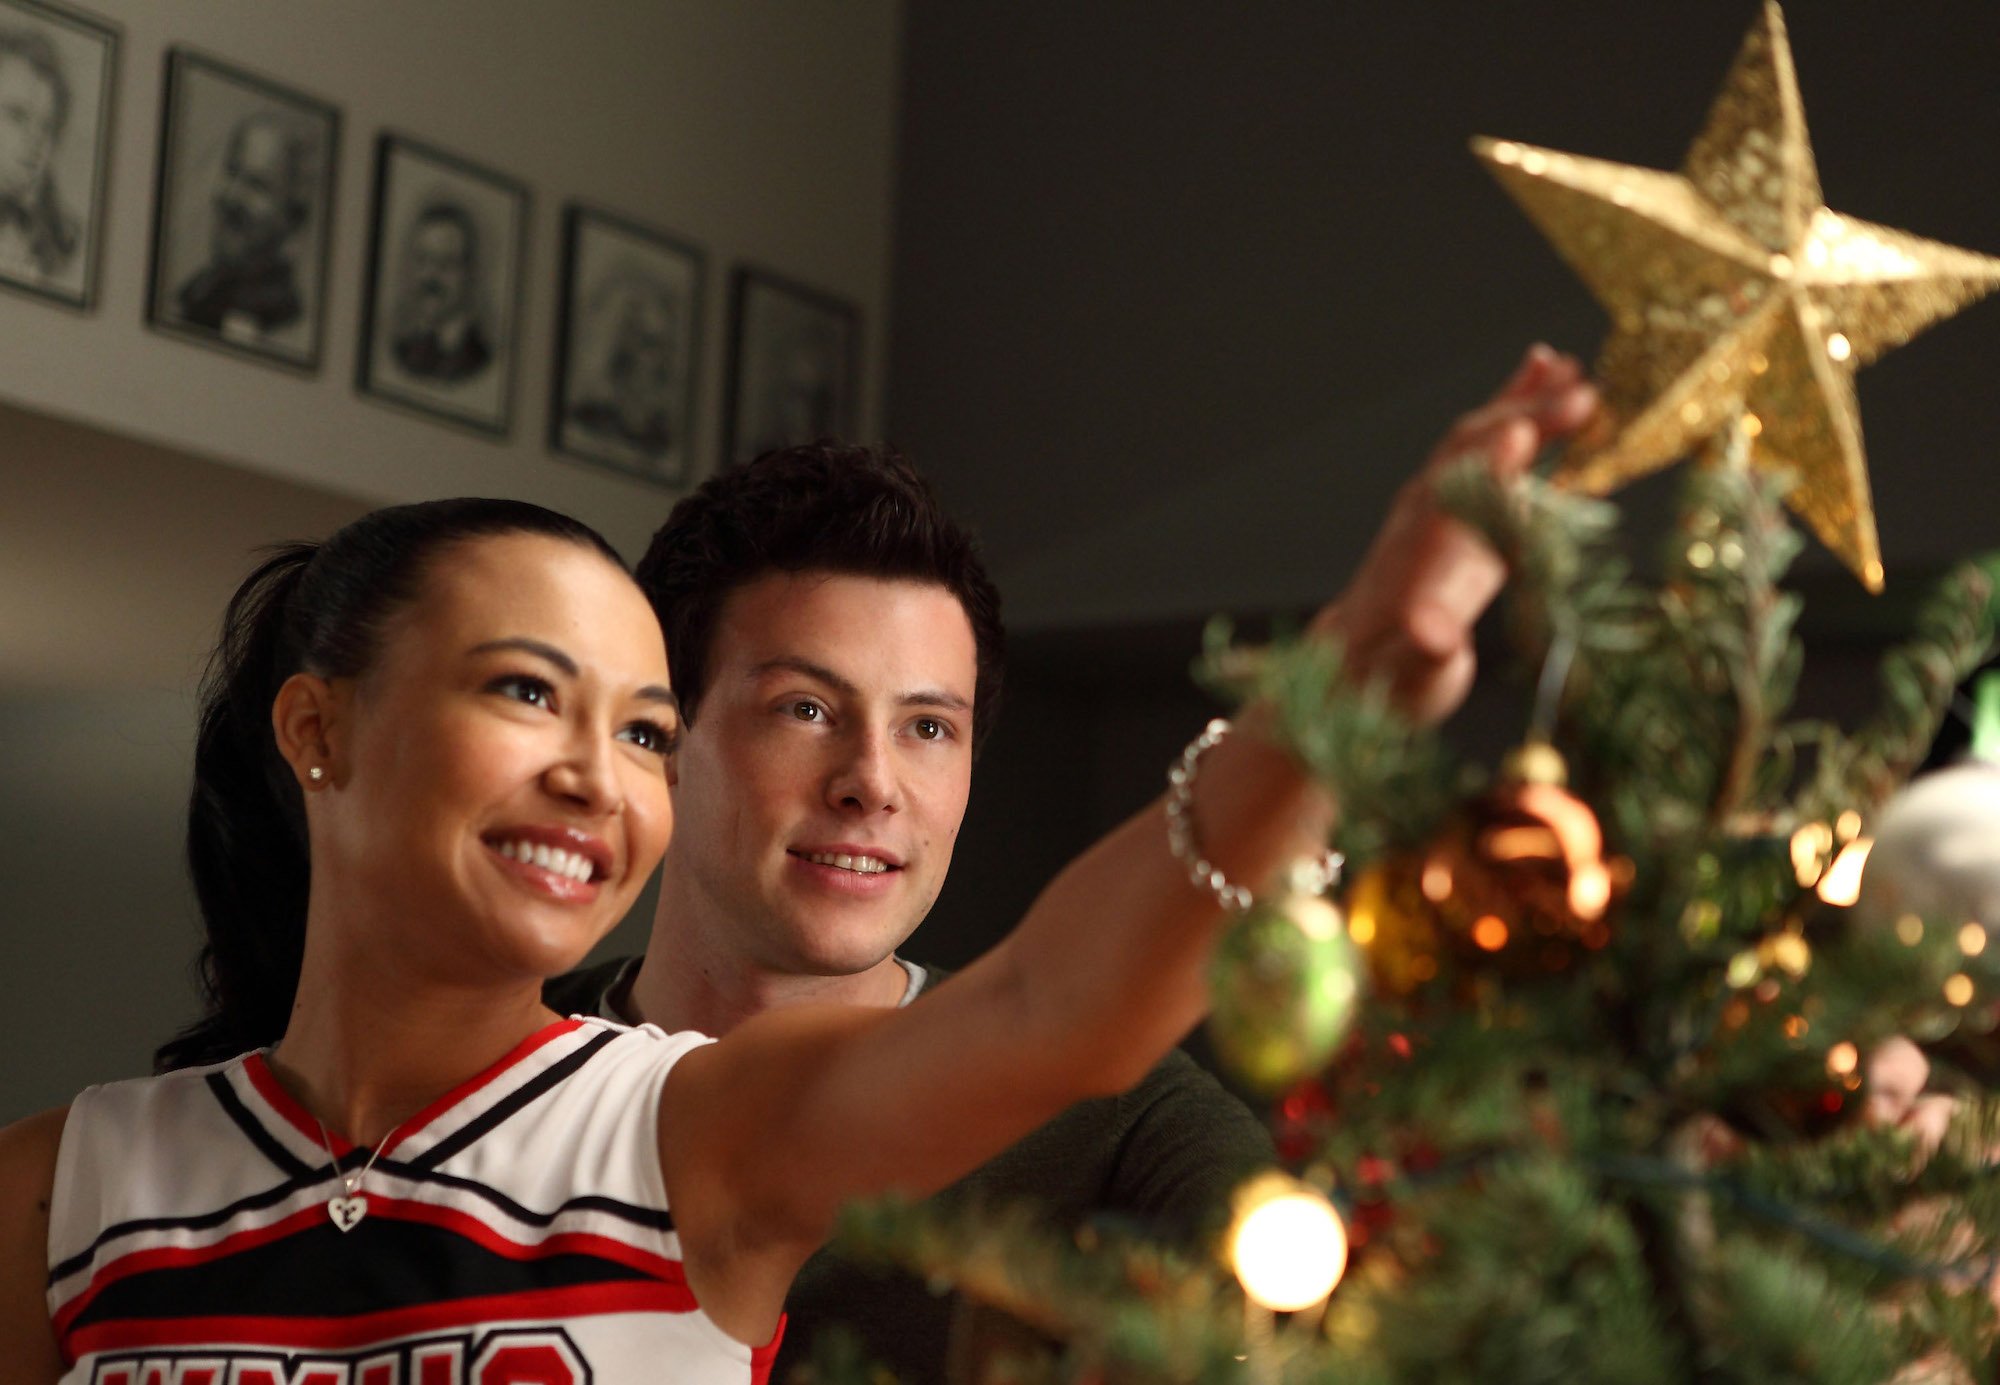 Santana (Naya Rivera, L) and Finn (Cory Monteith, R) in the episode "A Very Glee Christmas" on 'Glee'